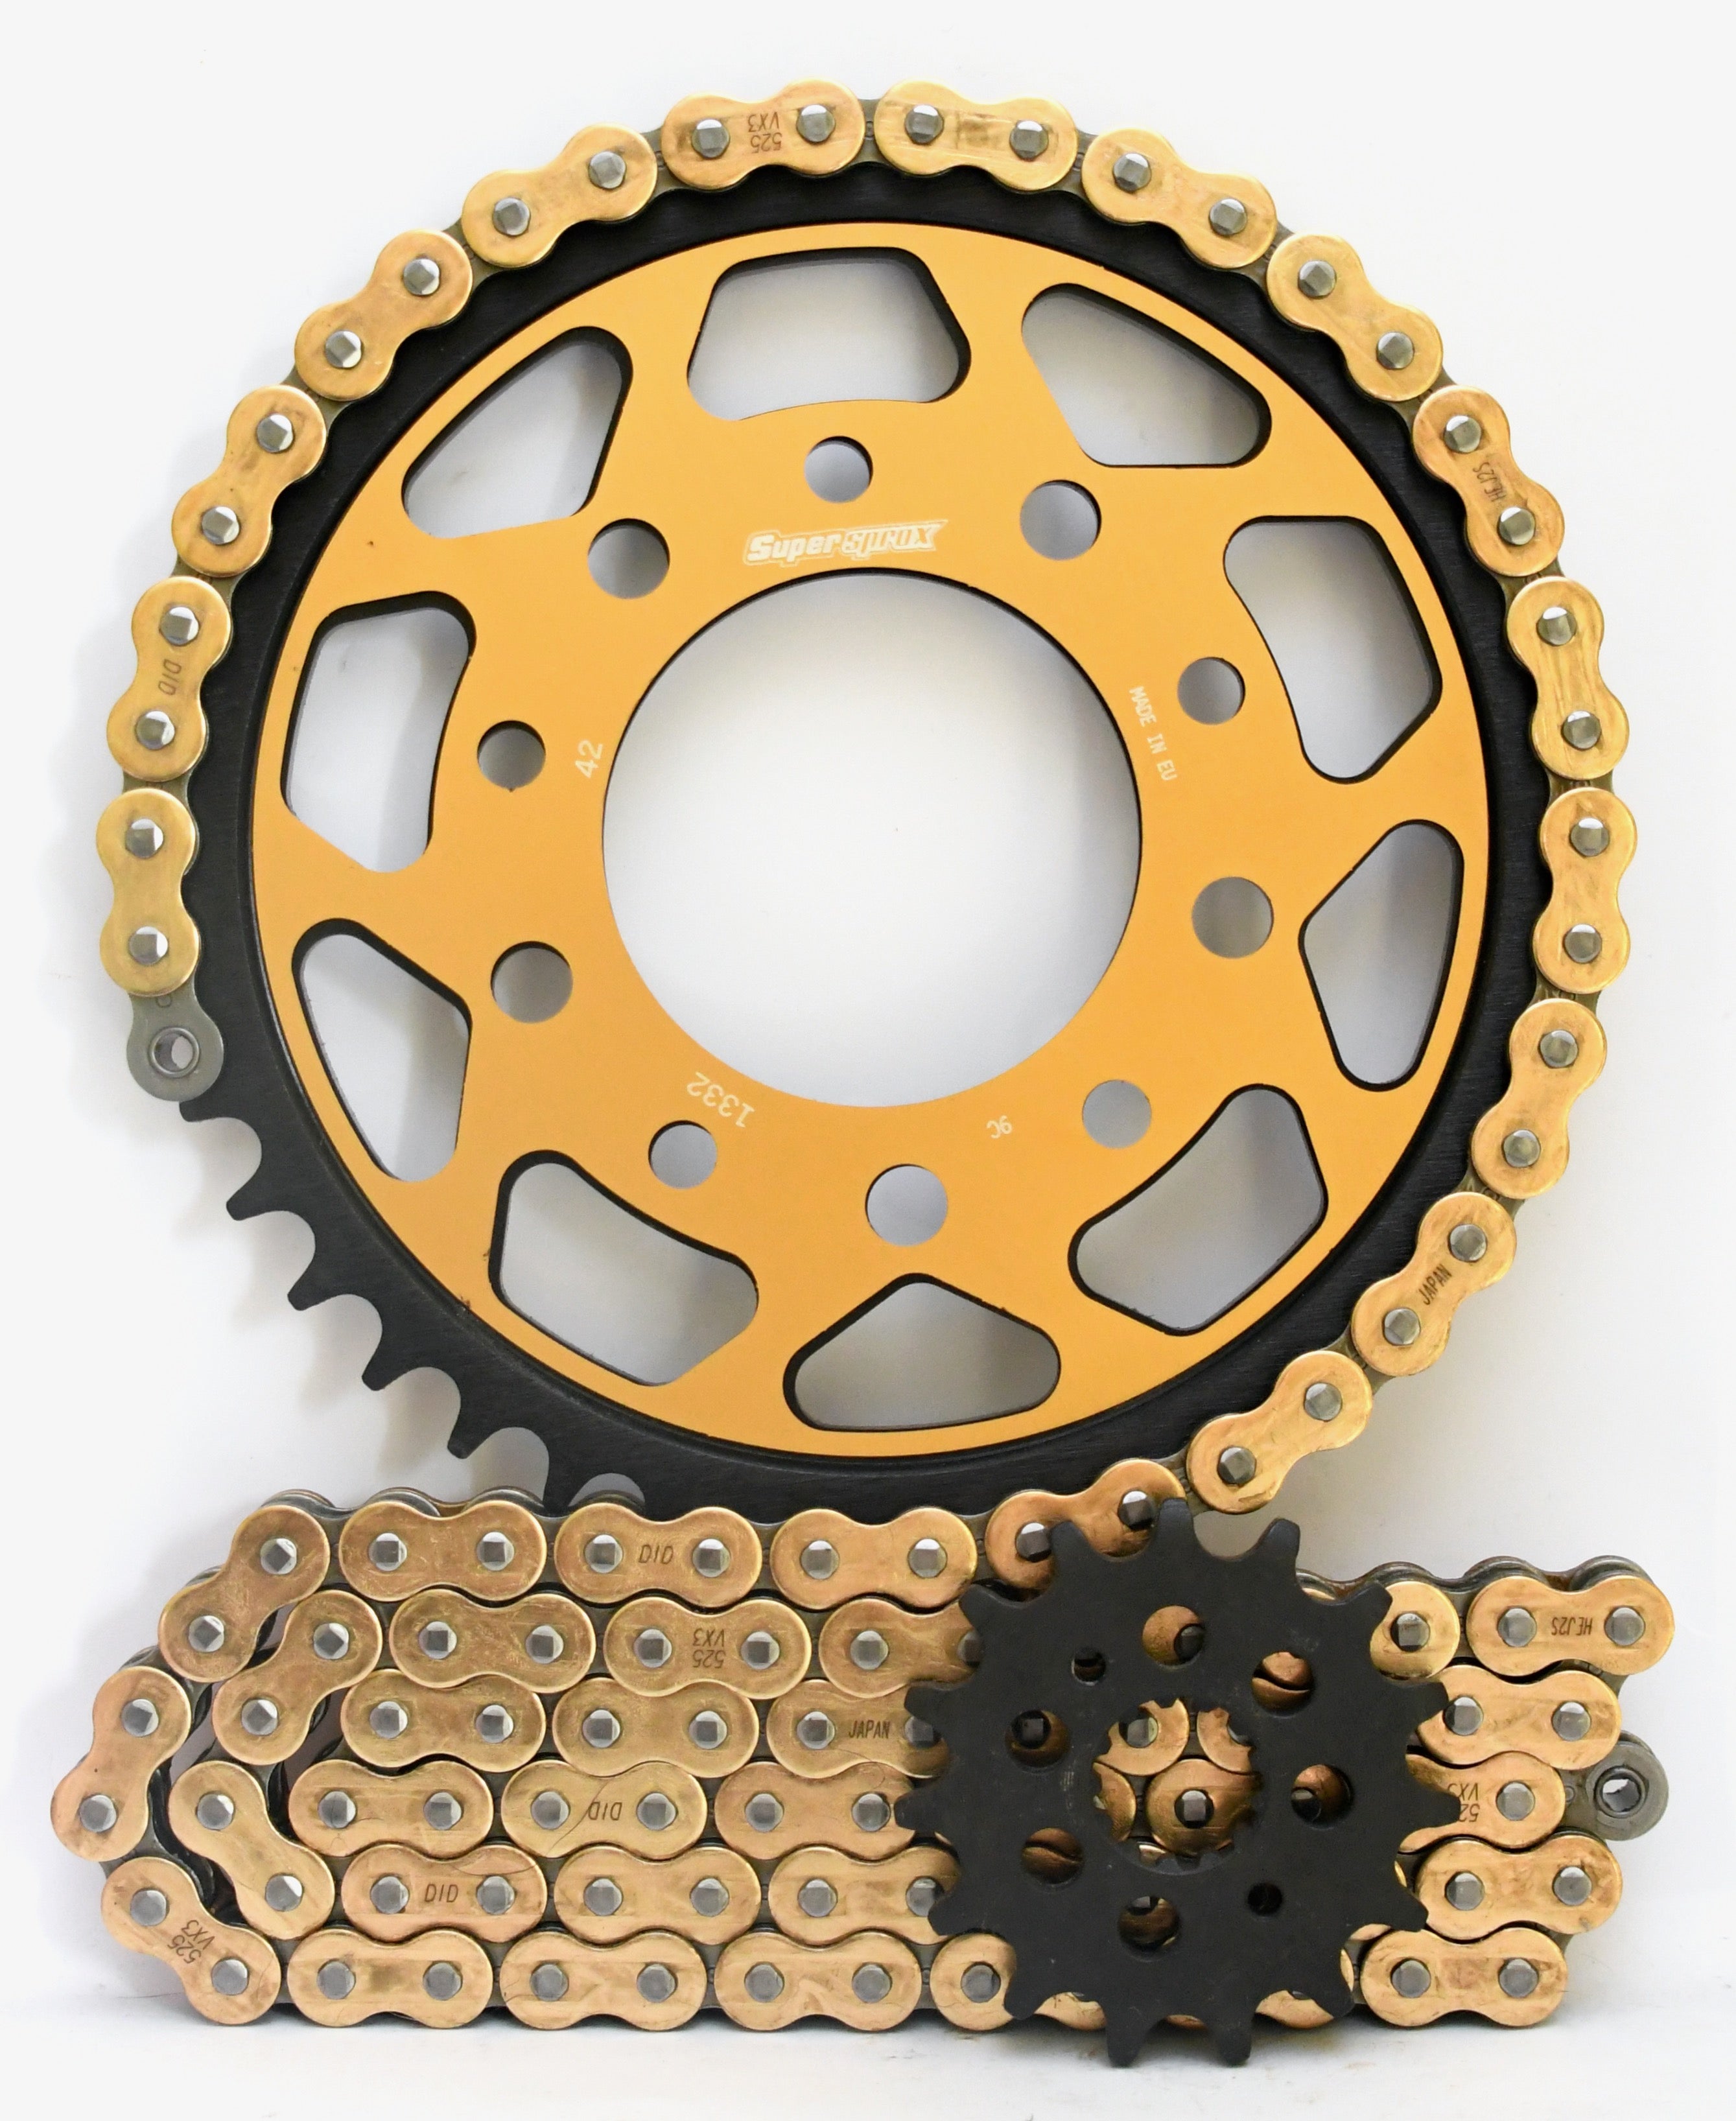 Supersprox Chain and Steel Sprocket Kit - Honda CRF1000/1100 Africa Twin 2016> - Standard Gearing - 0